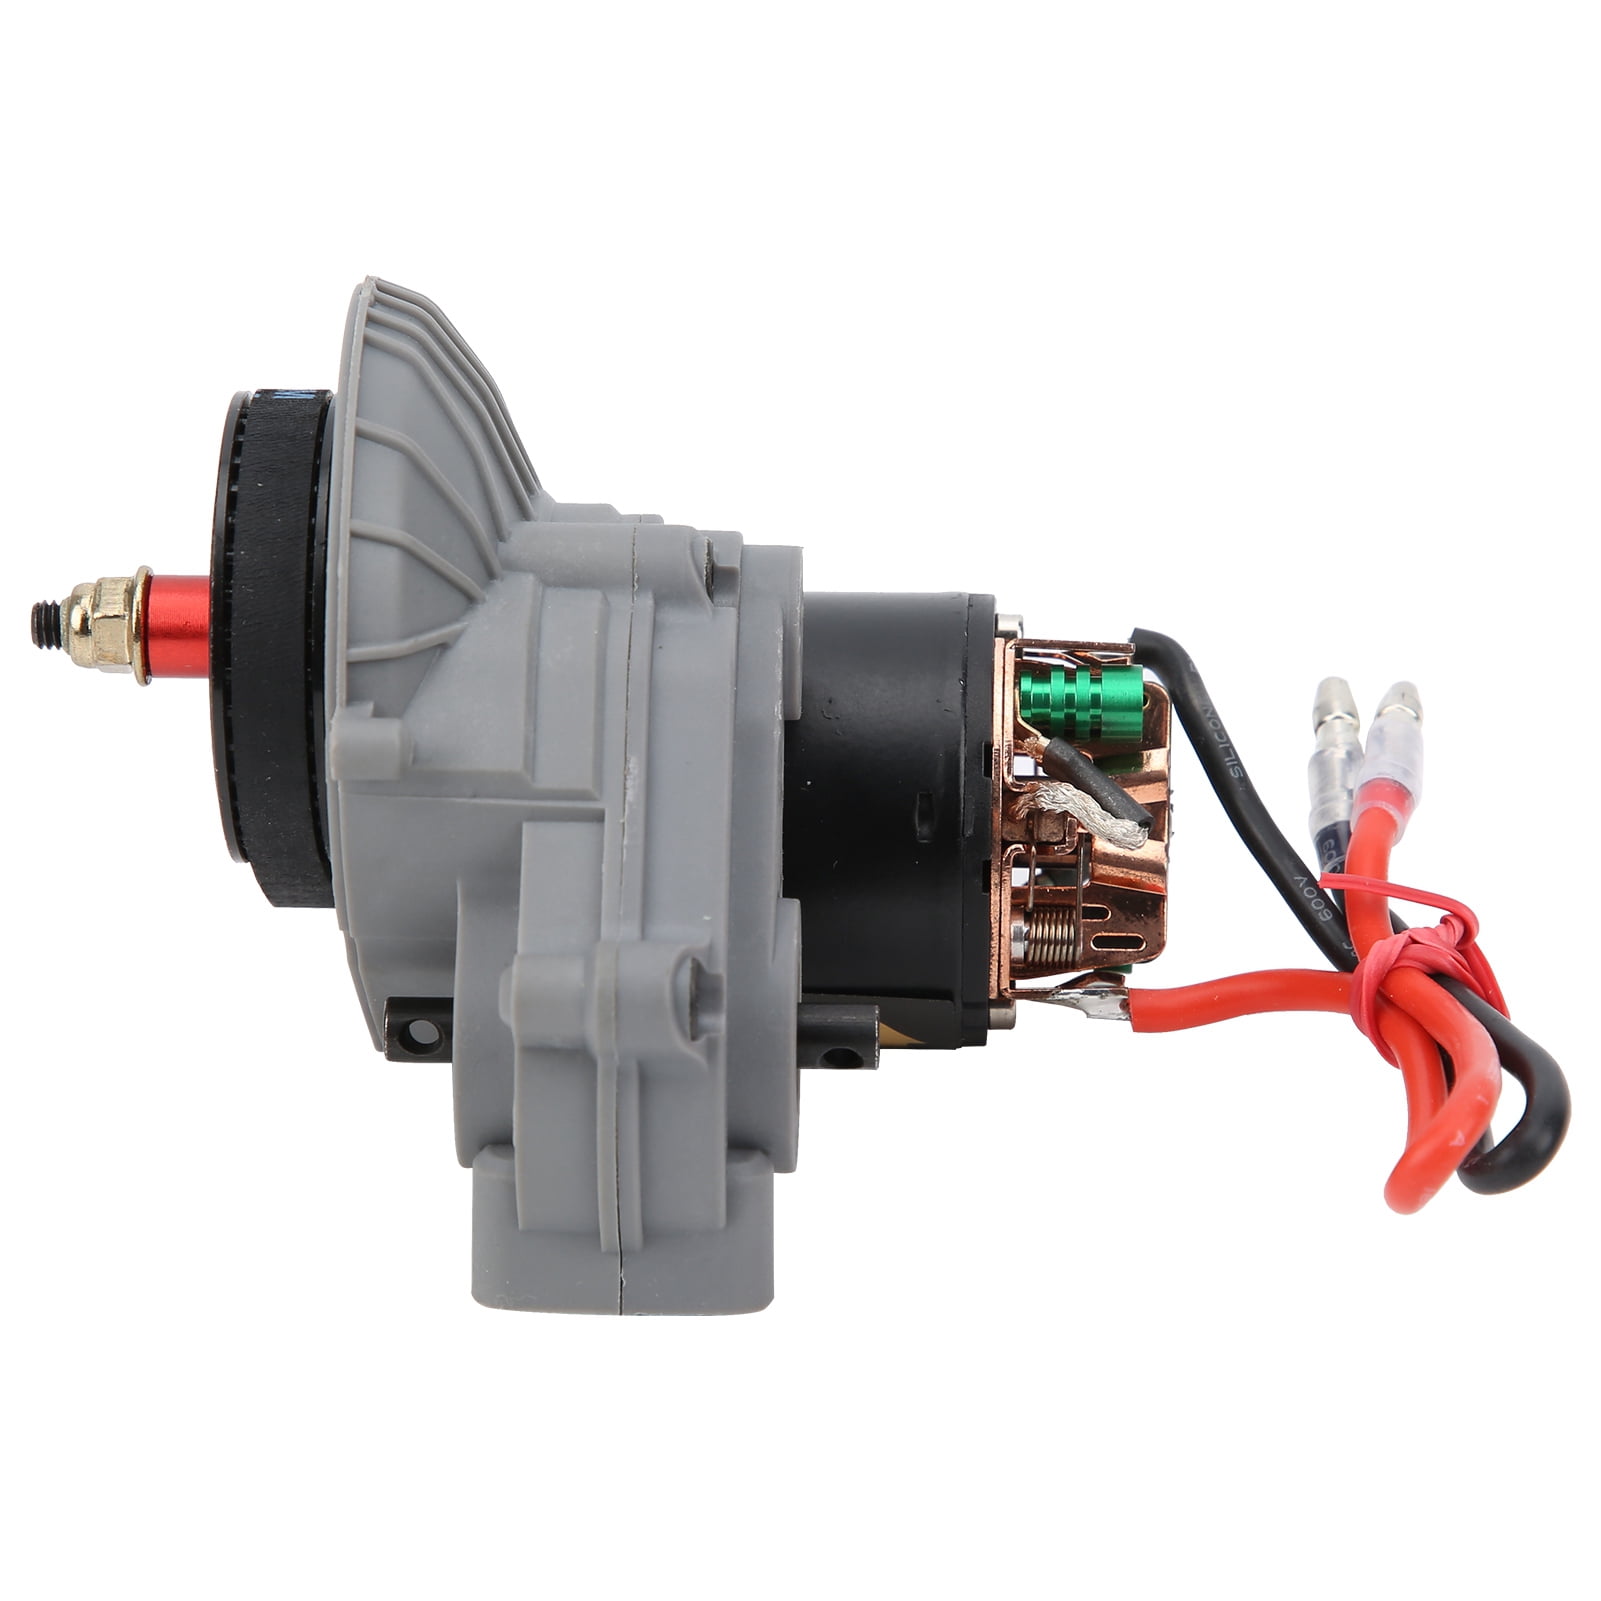 Grey RC Gearbox,Durable Metal Gear Box with 540 55T Brushed Motor for Axial SCX10 II 90046 90047 1/10 RC Car Upgrade Parts 